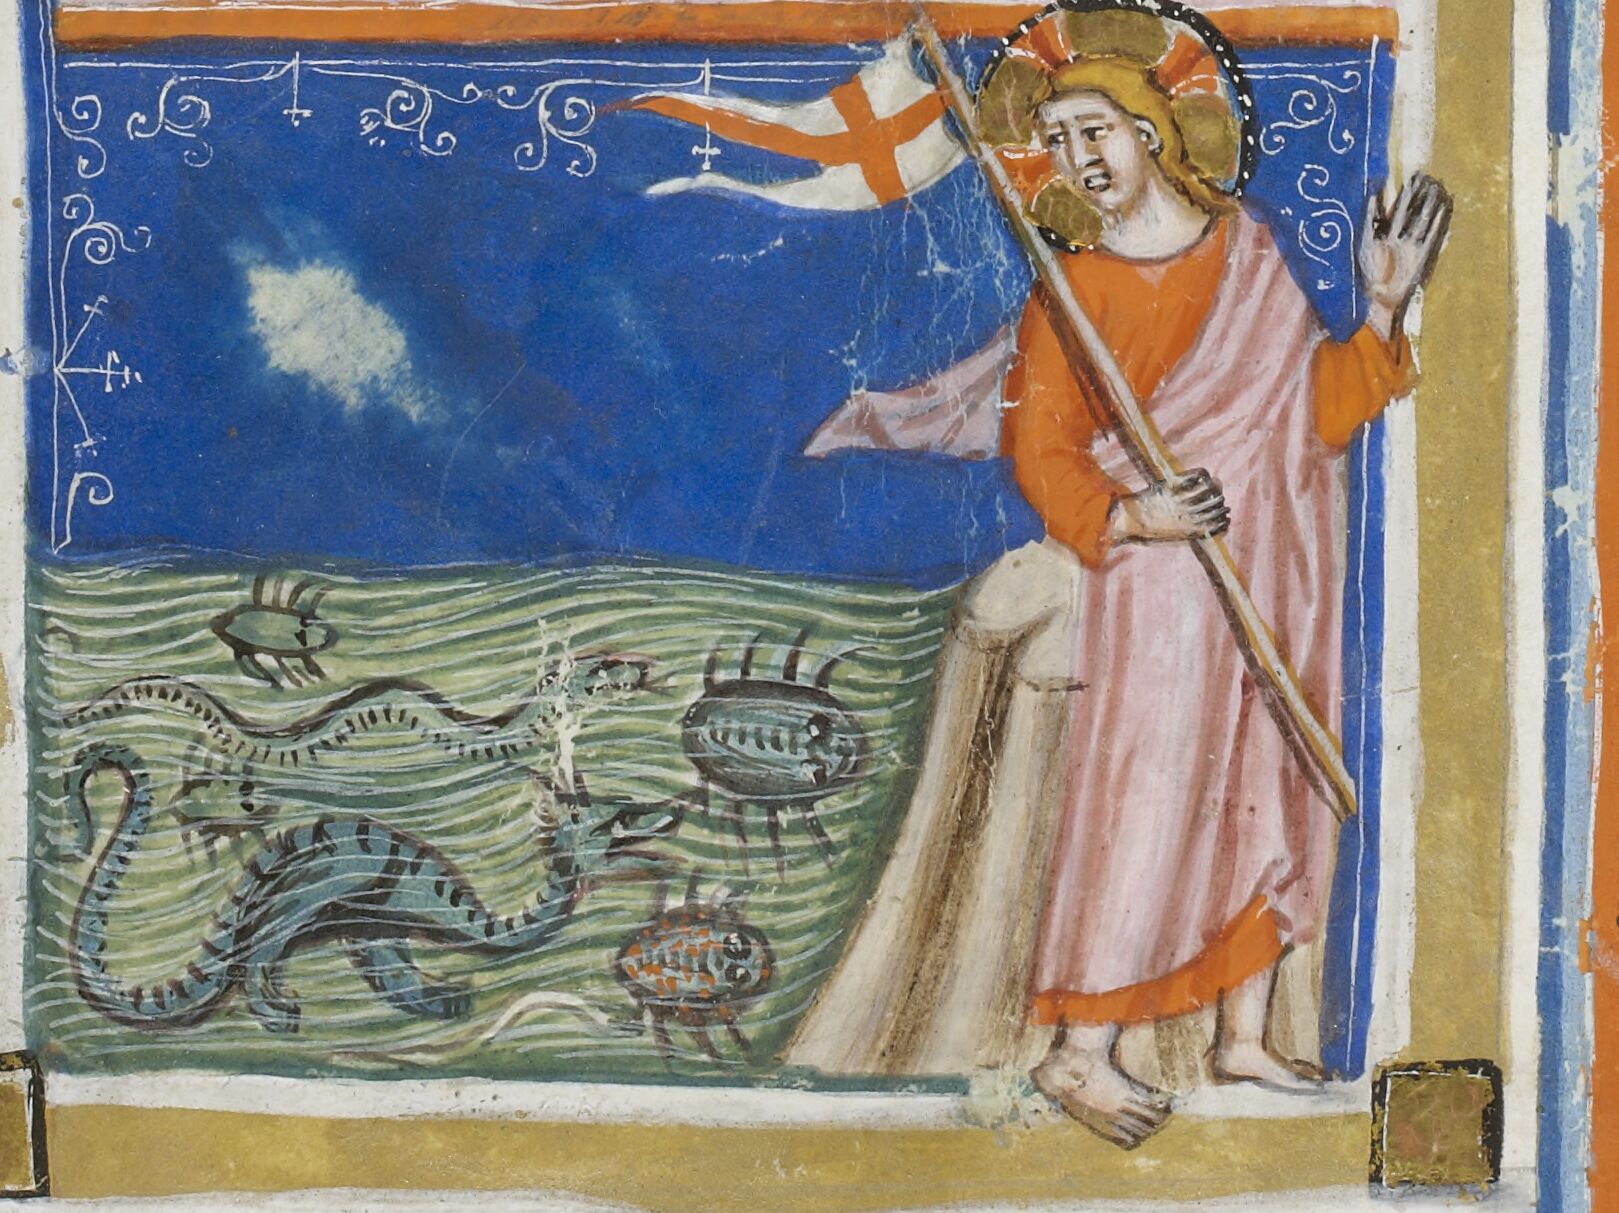 Jesus and sea monsters